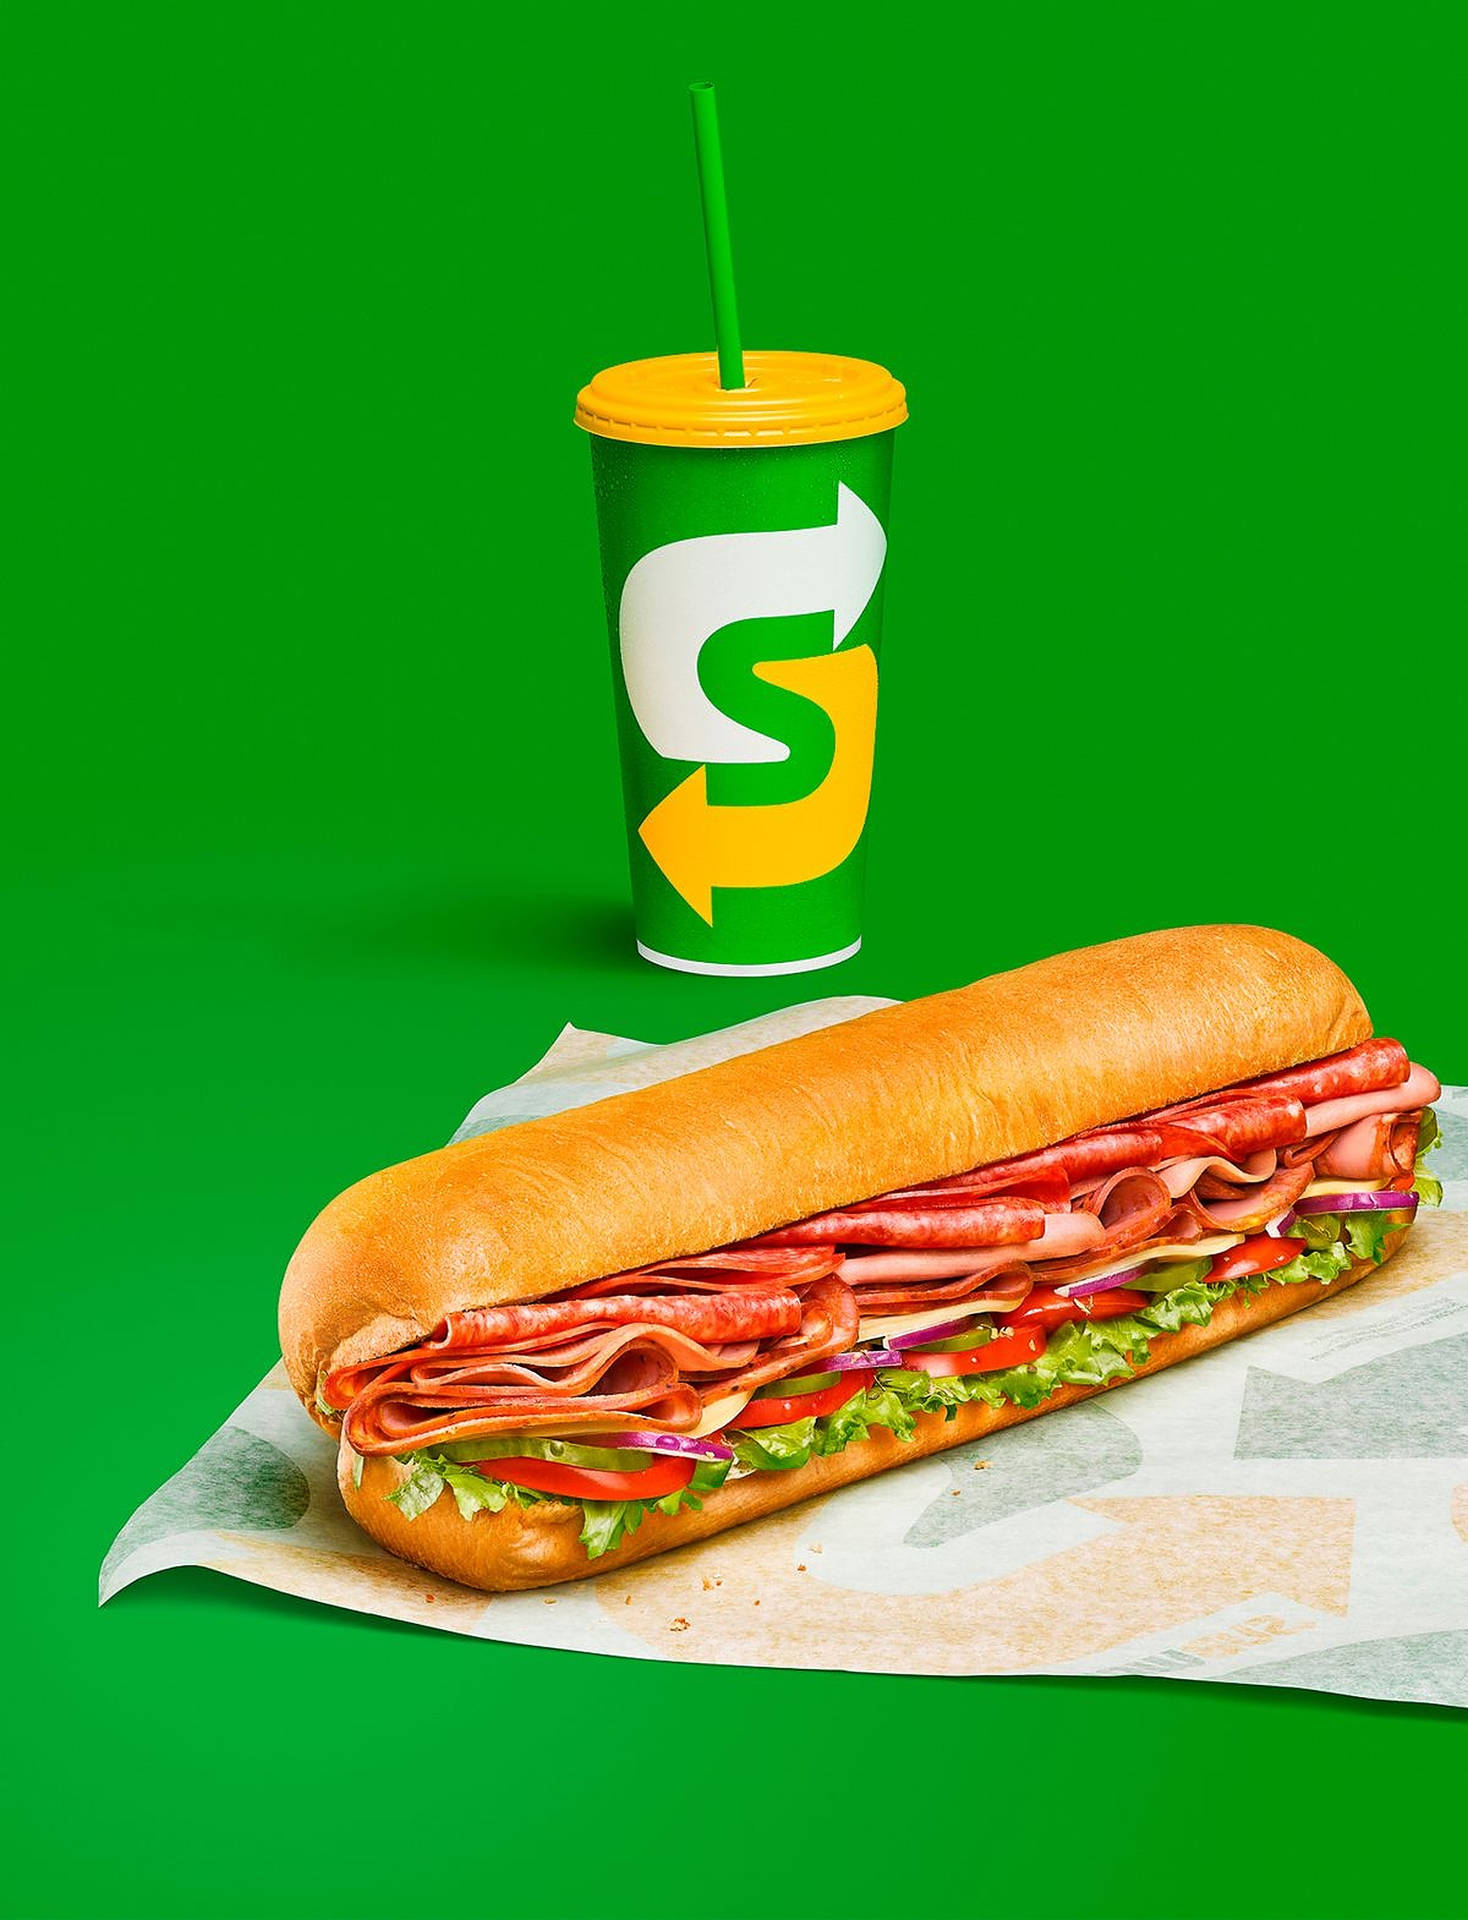 Subway Sandwich And Drink